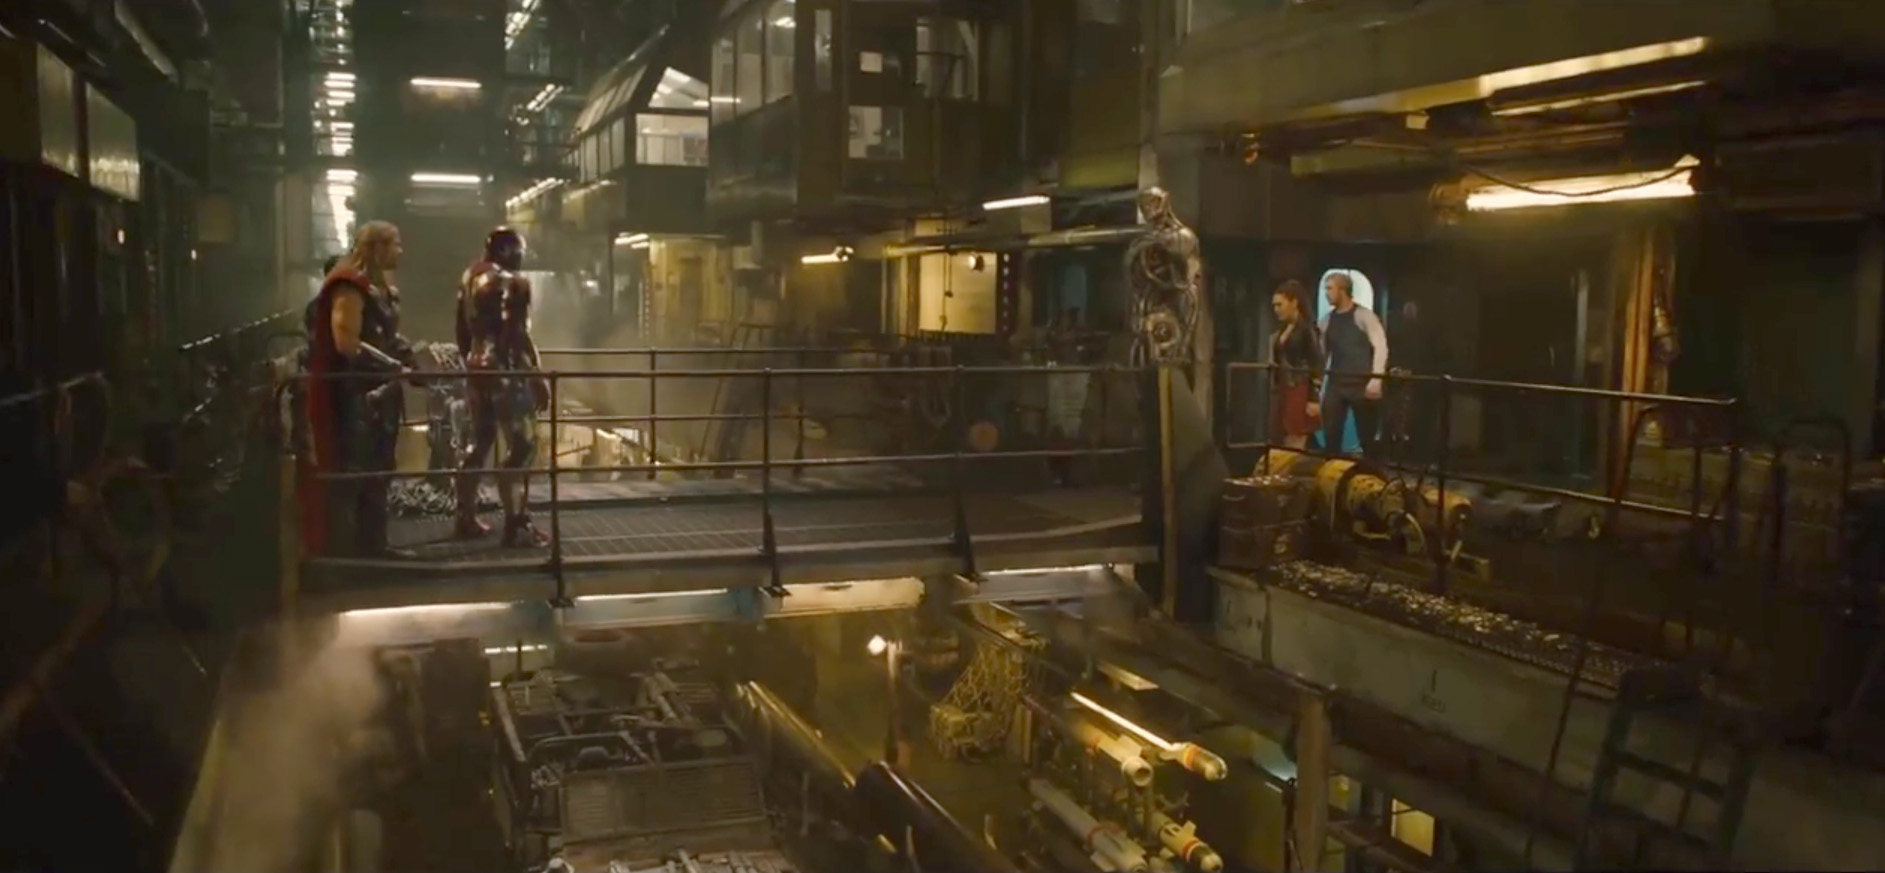 PHOTO: Ultron prepares for battle in the latest trailer for Marvel's Avengers: Age of Ultron.